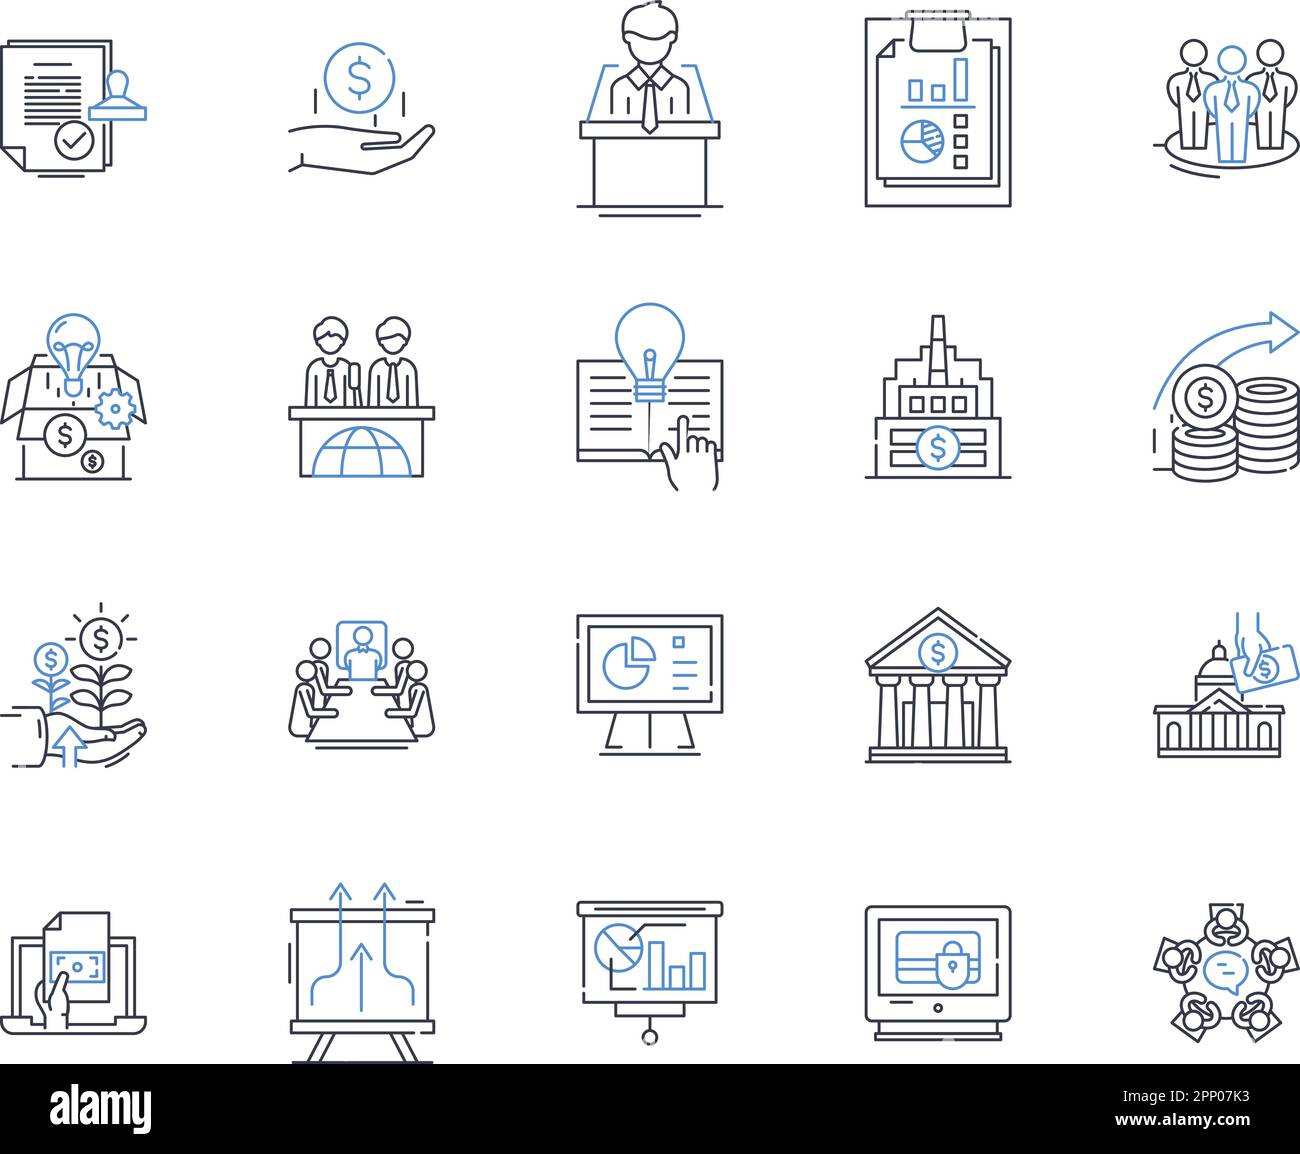 Loan provider line icons collection. Finance, Credit, Lending, Mortgage, Interest, Application, Approval vector and linear illustration. Repayment Stock Vector